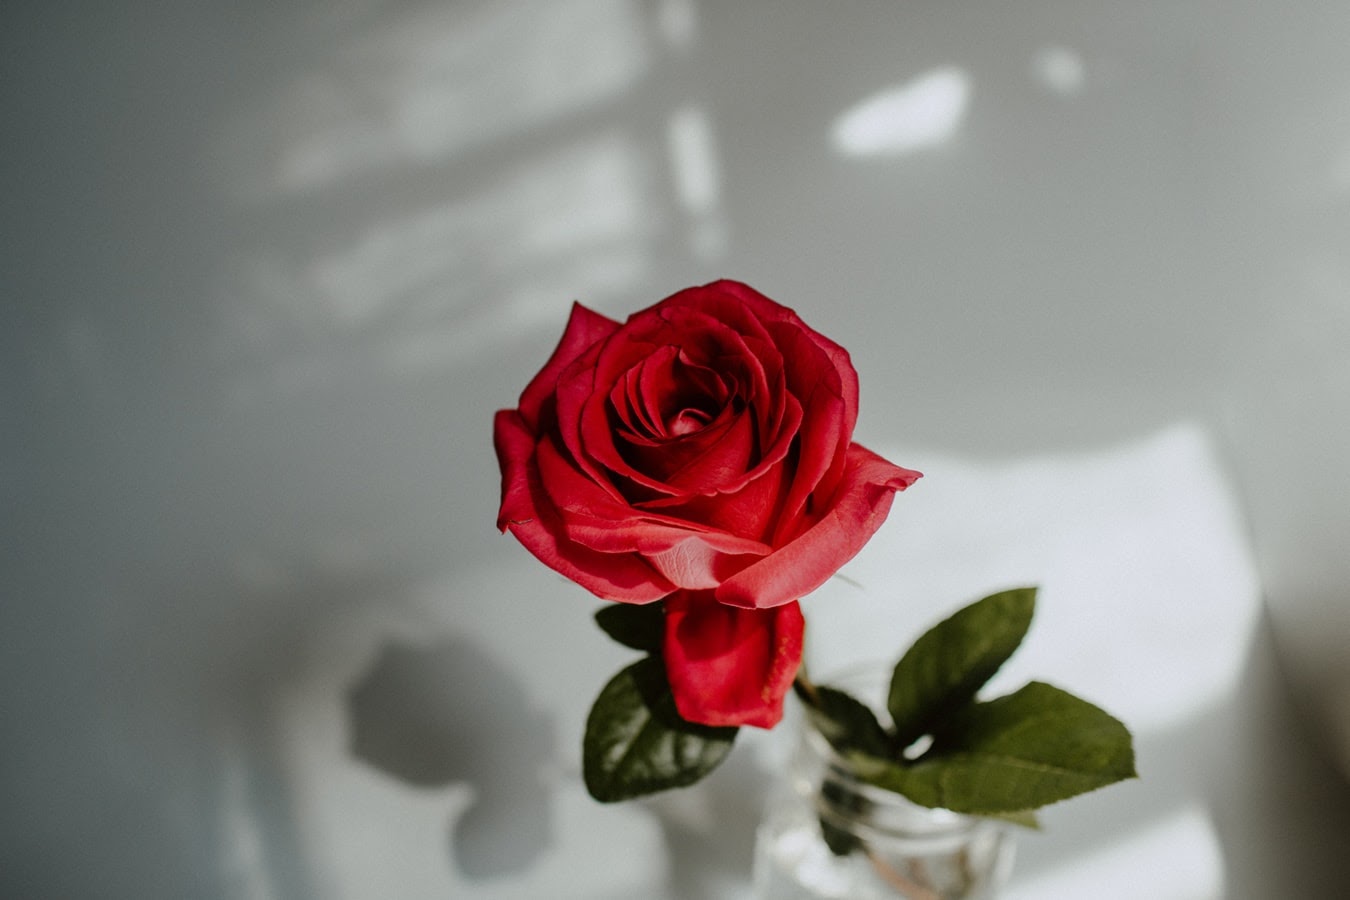 How To Preserve a Rose To Make It Last Forever